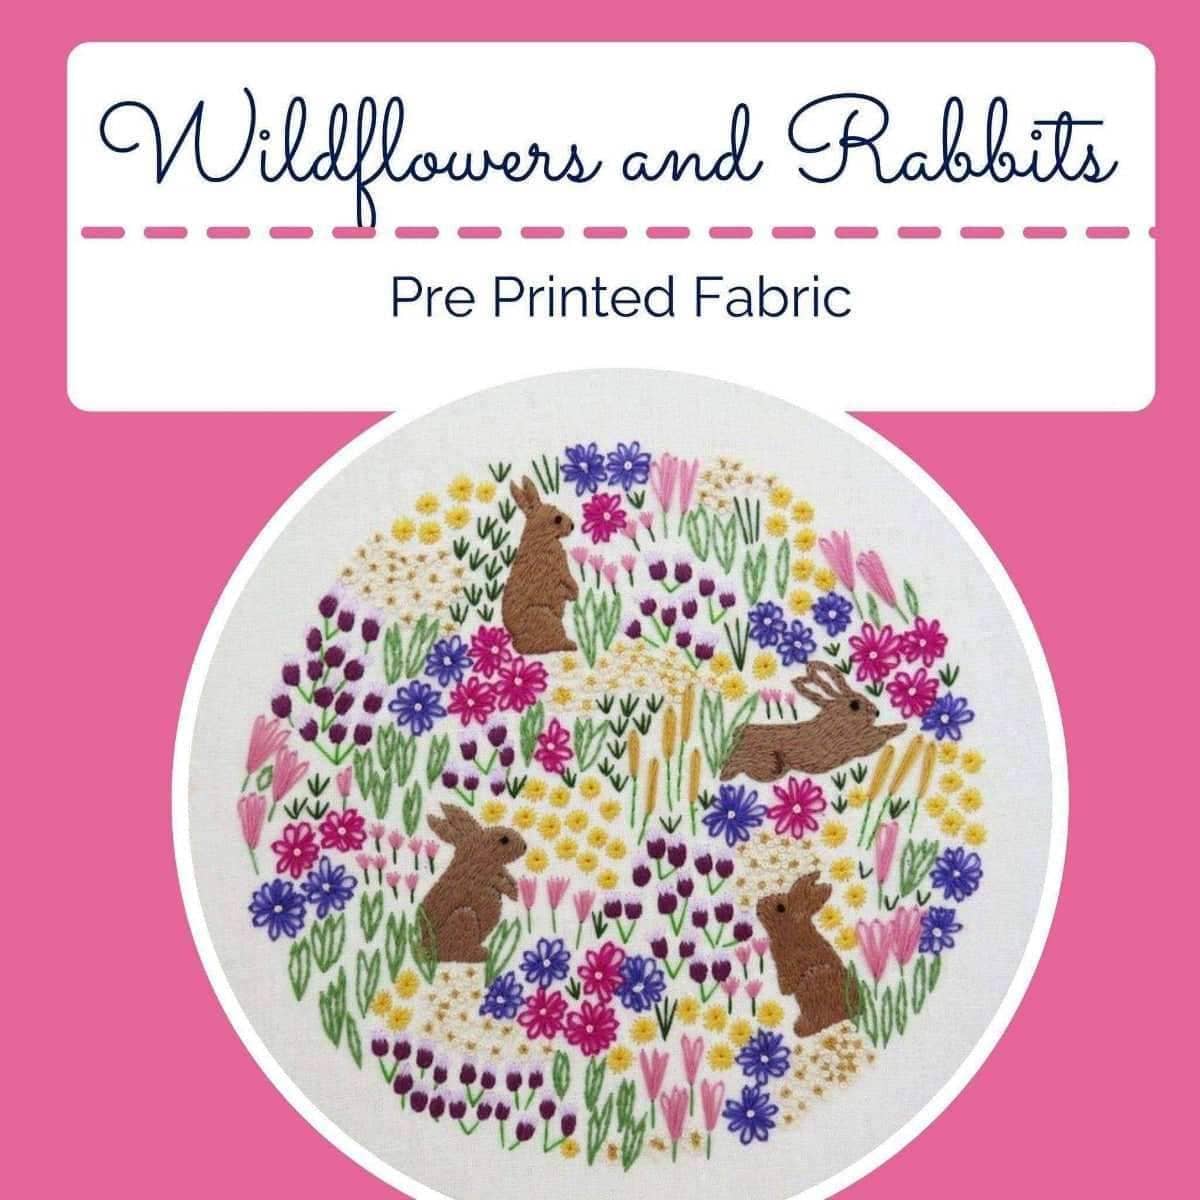 Wild Flowers and Rabbits, Pre Printed Embroidery Fabric Panel PLUS PDF Pattern , Pre Printed Fabric Pattern , StitchDoodles , embroidery hoop kit, Embroidery Kit, embroidery kit for adults, embroidery kit for beginners, embroidery kits for adults, embroidery kits for beginers, hand embroidery, hand embroidery fabric, modern embroidery kits , StitchDoodles , shop.stitchdoodles.com